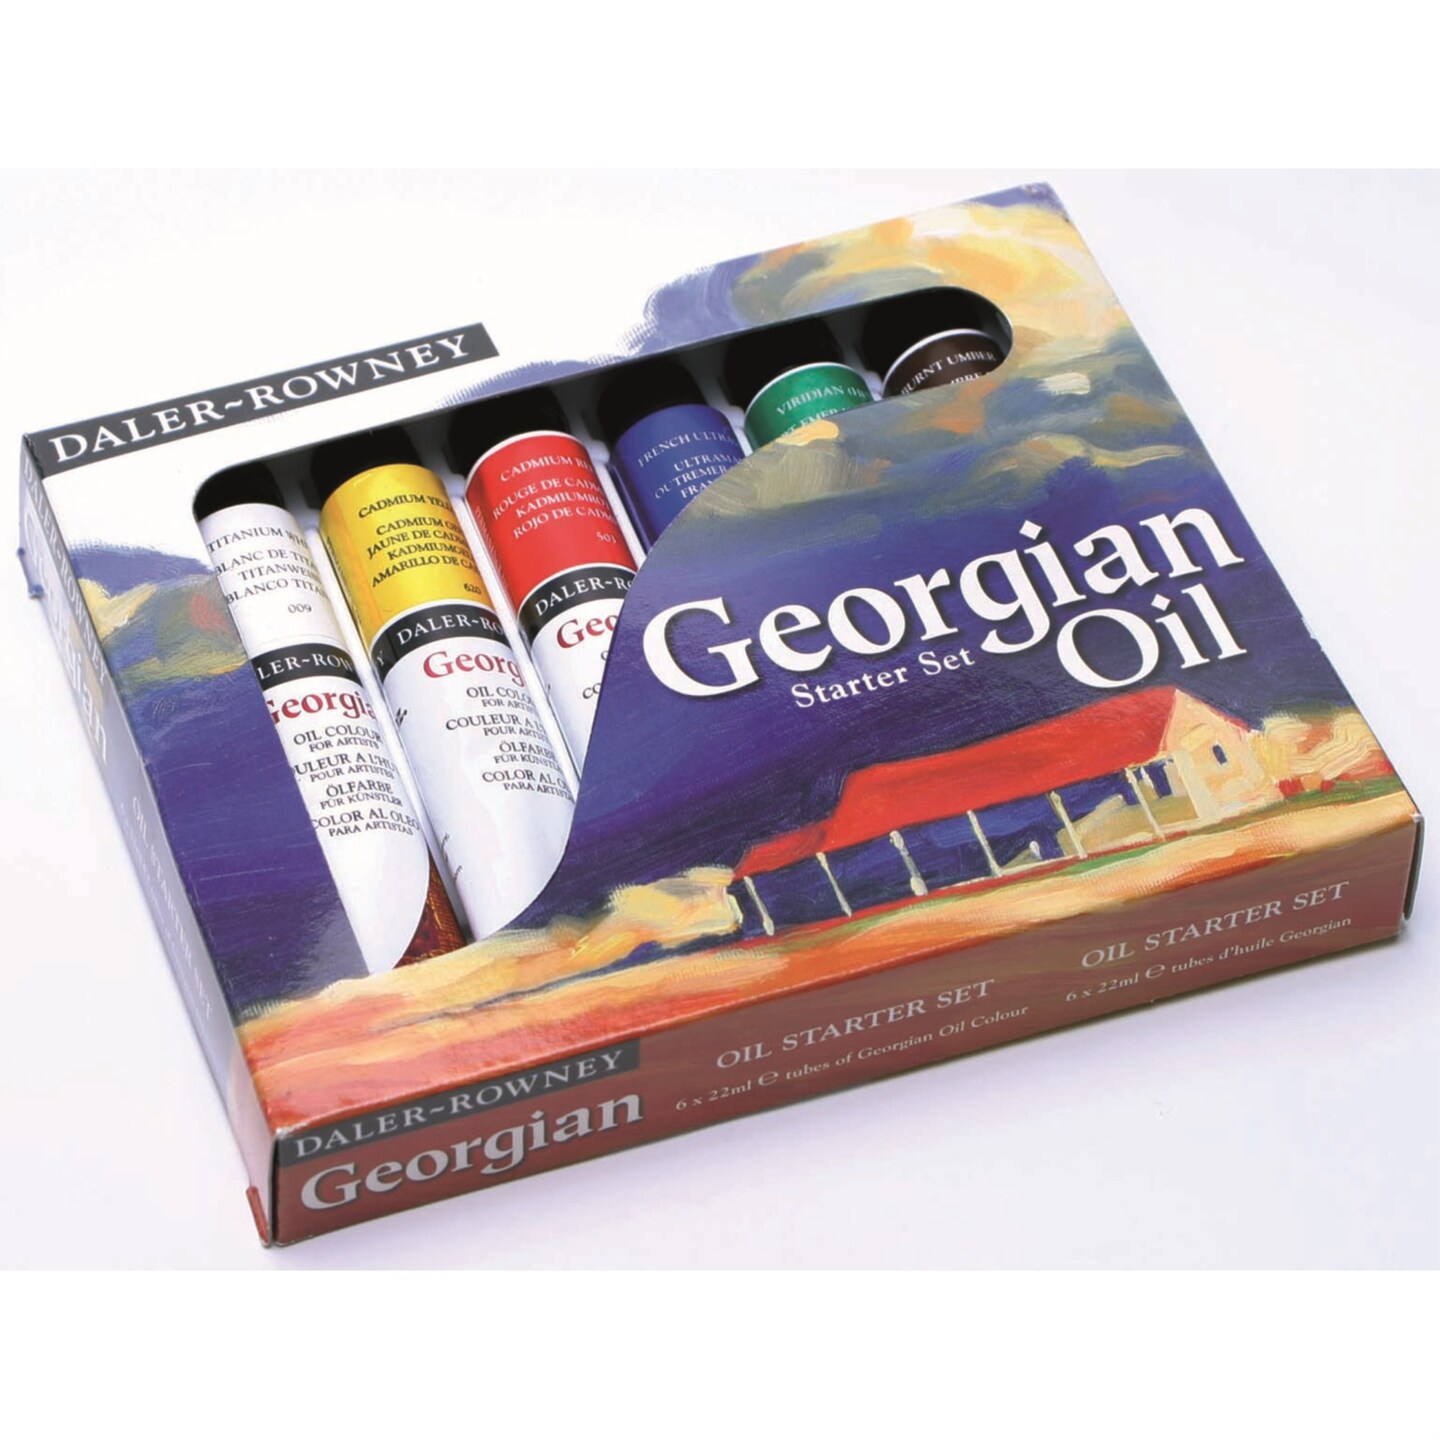  Daler-Rowney Georgian 6-Tube Mixing Artist Oil Paint Set -  Painting Set for Canvas Paper and More - Oil Painting Supplies for Artists  and Students - Oil Paints for All Skill Sets